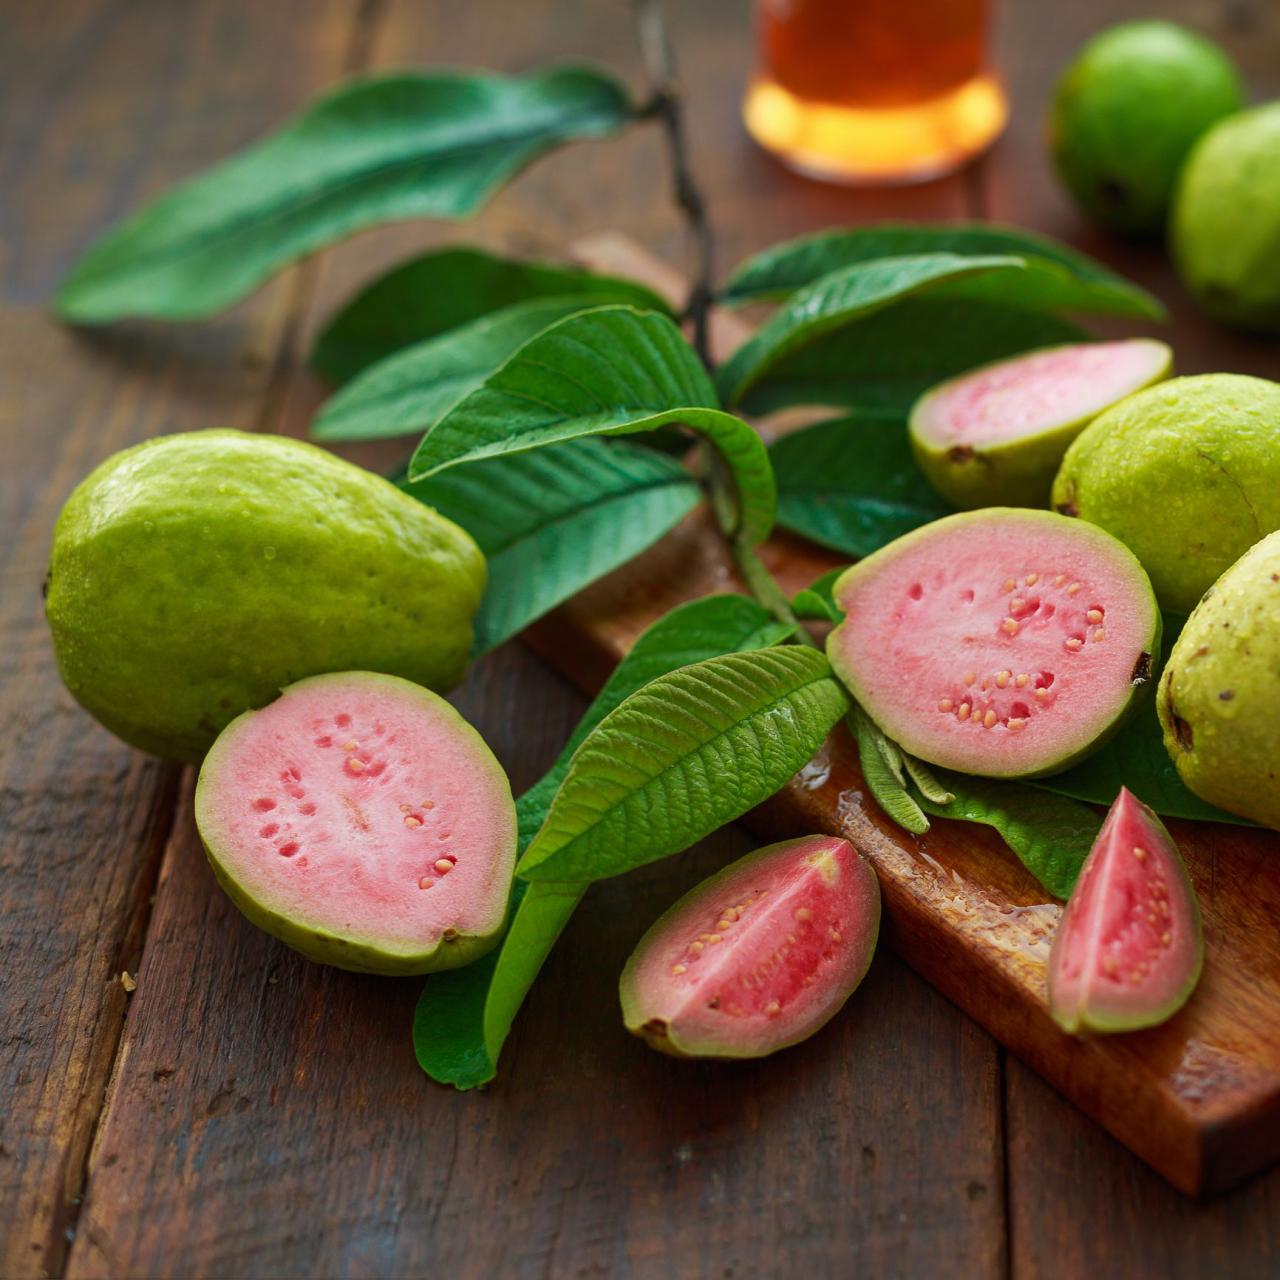 How to Eat Guava, According to Chefs